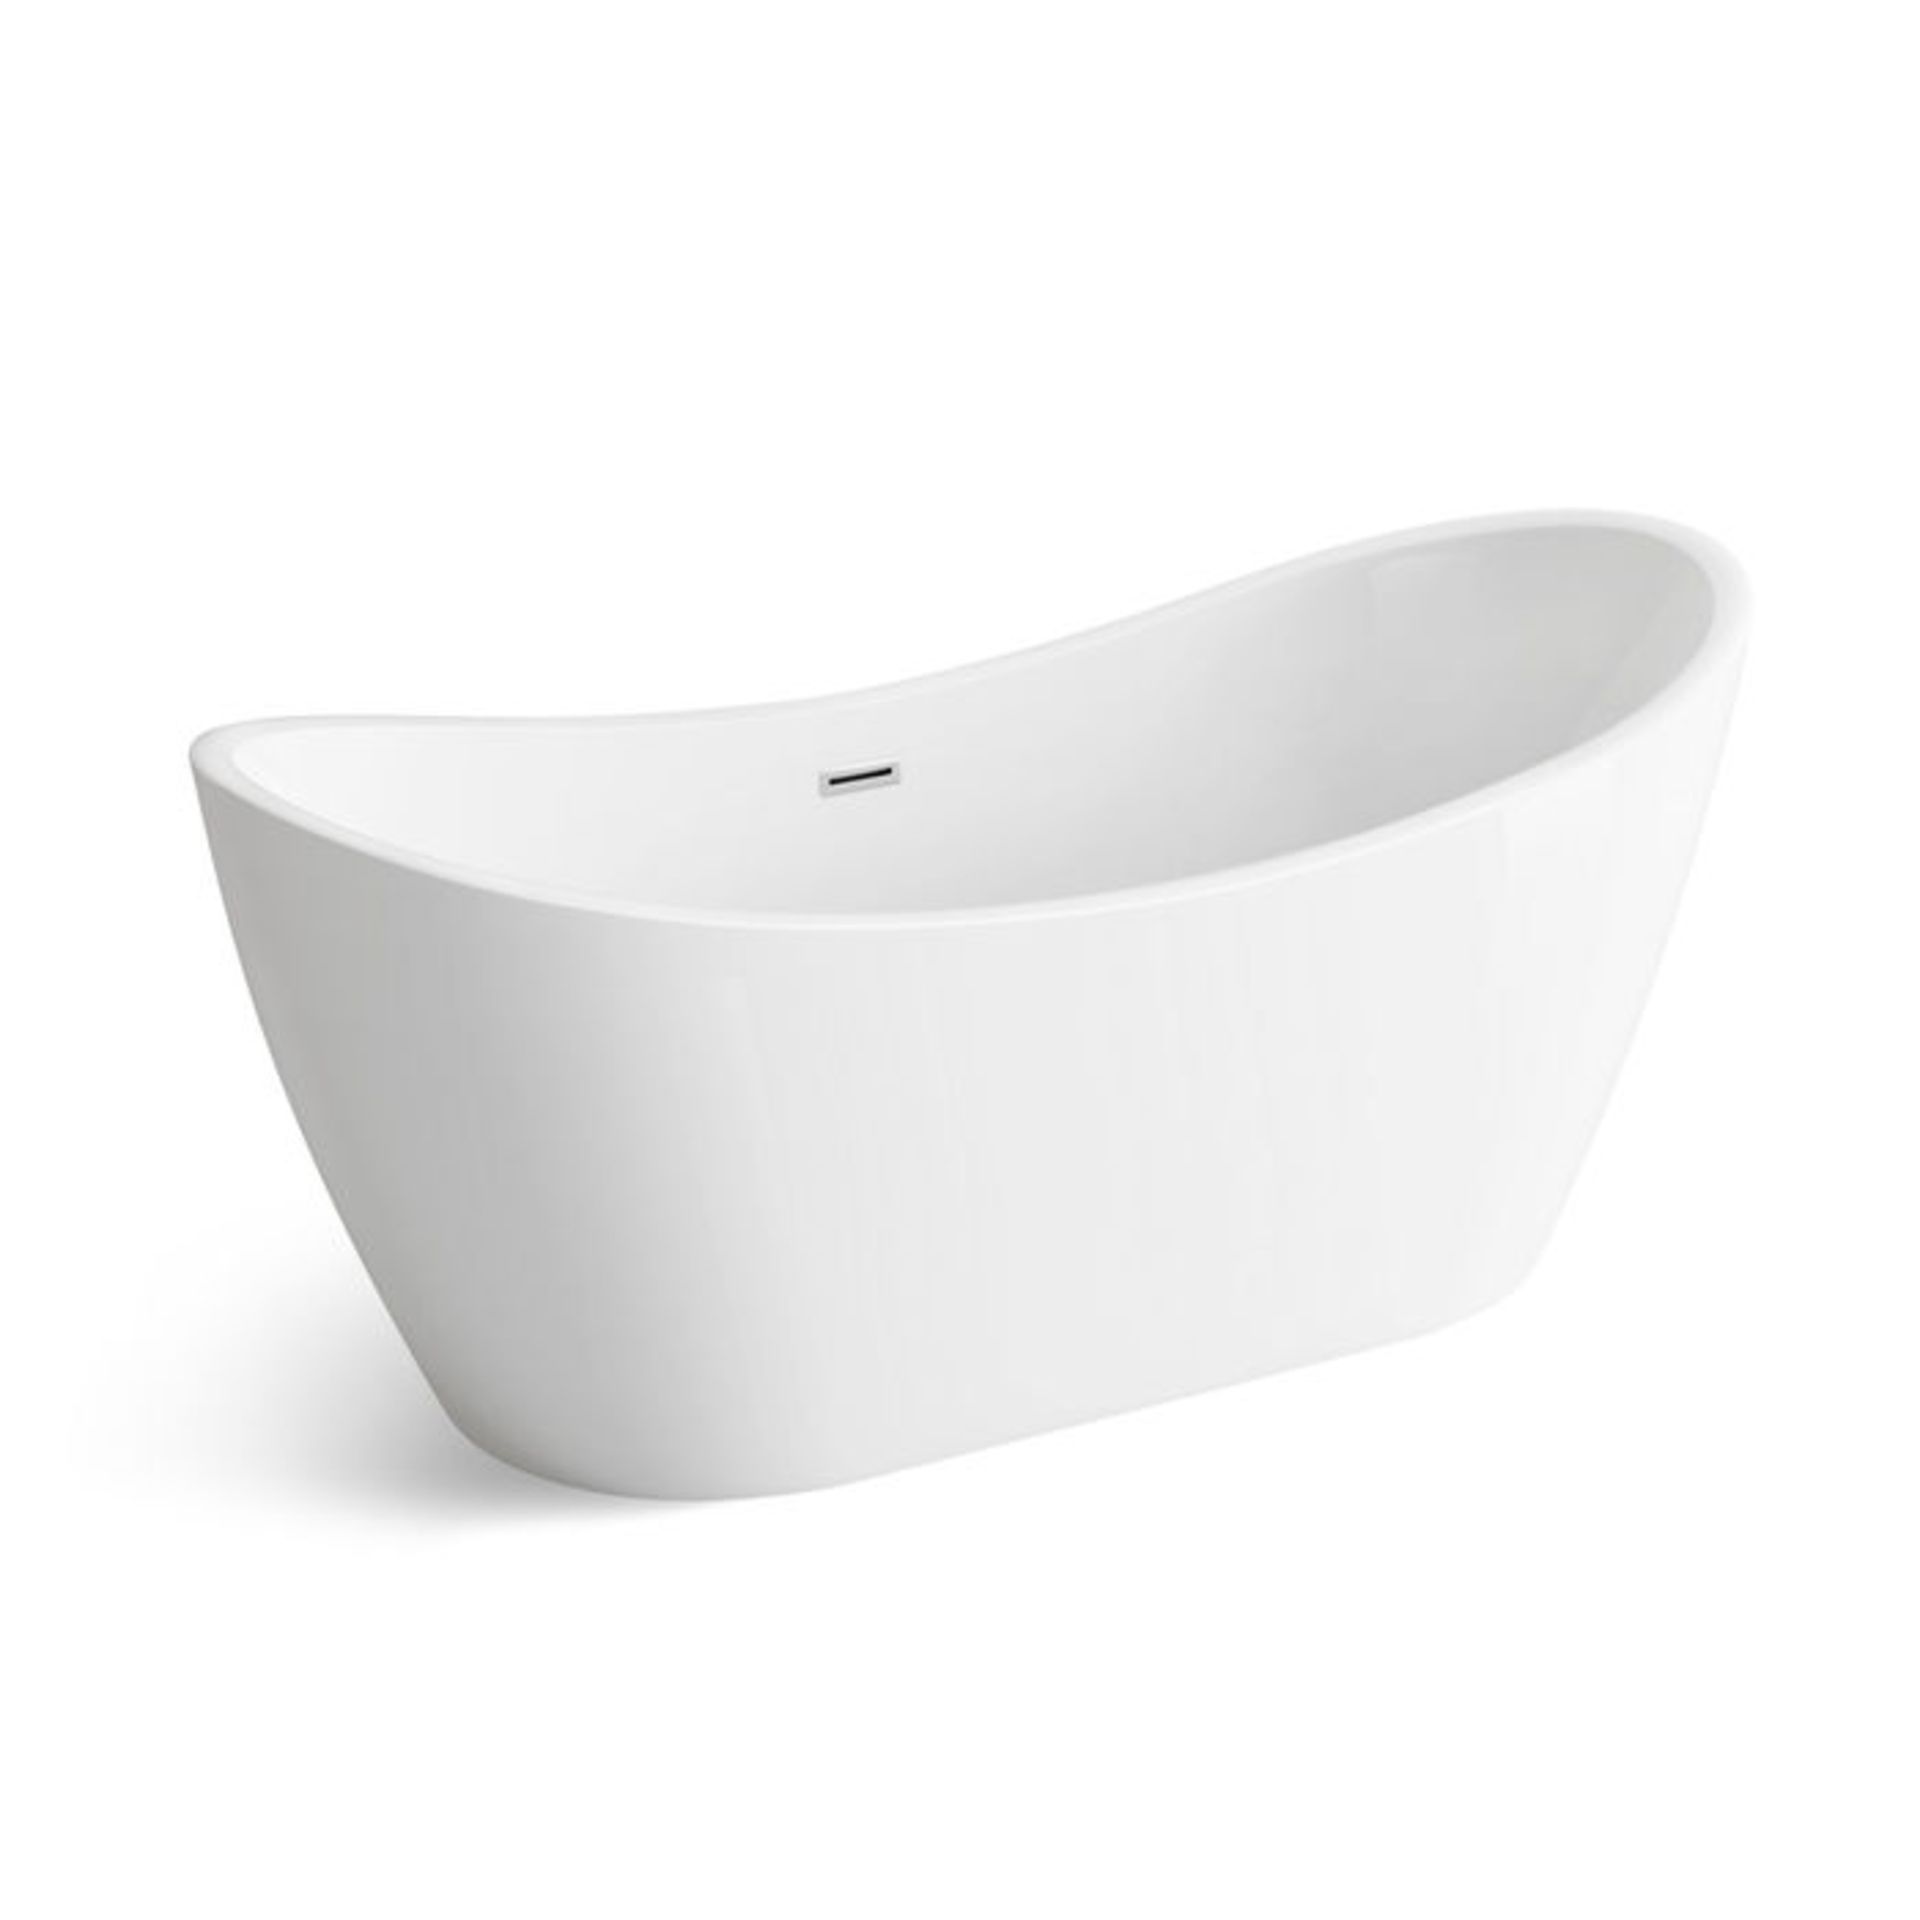 (SA6) 1700mmx710mm Caitlyn Freestanding Bath. Visually simplistic to suit any bathroom interior - Image 3 of 3